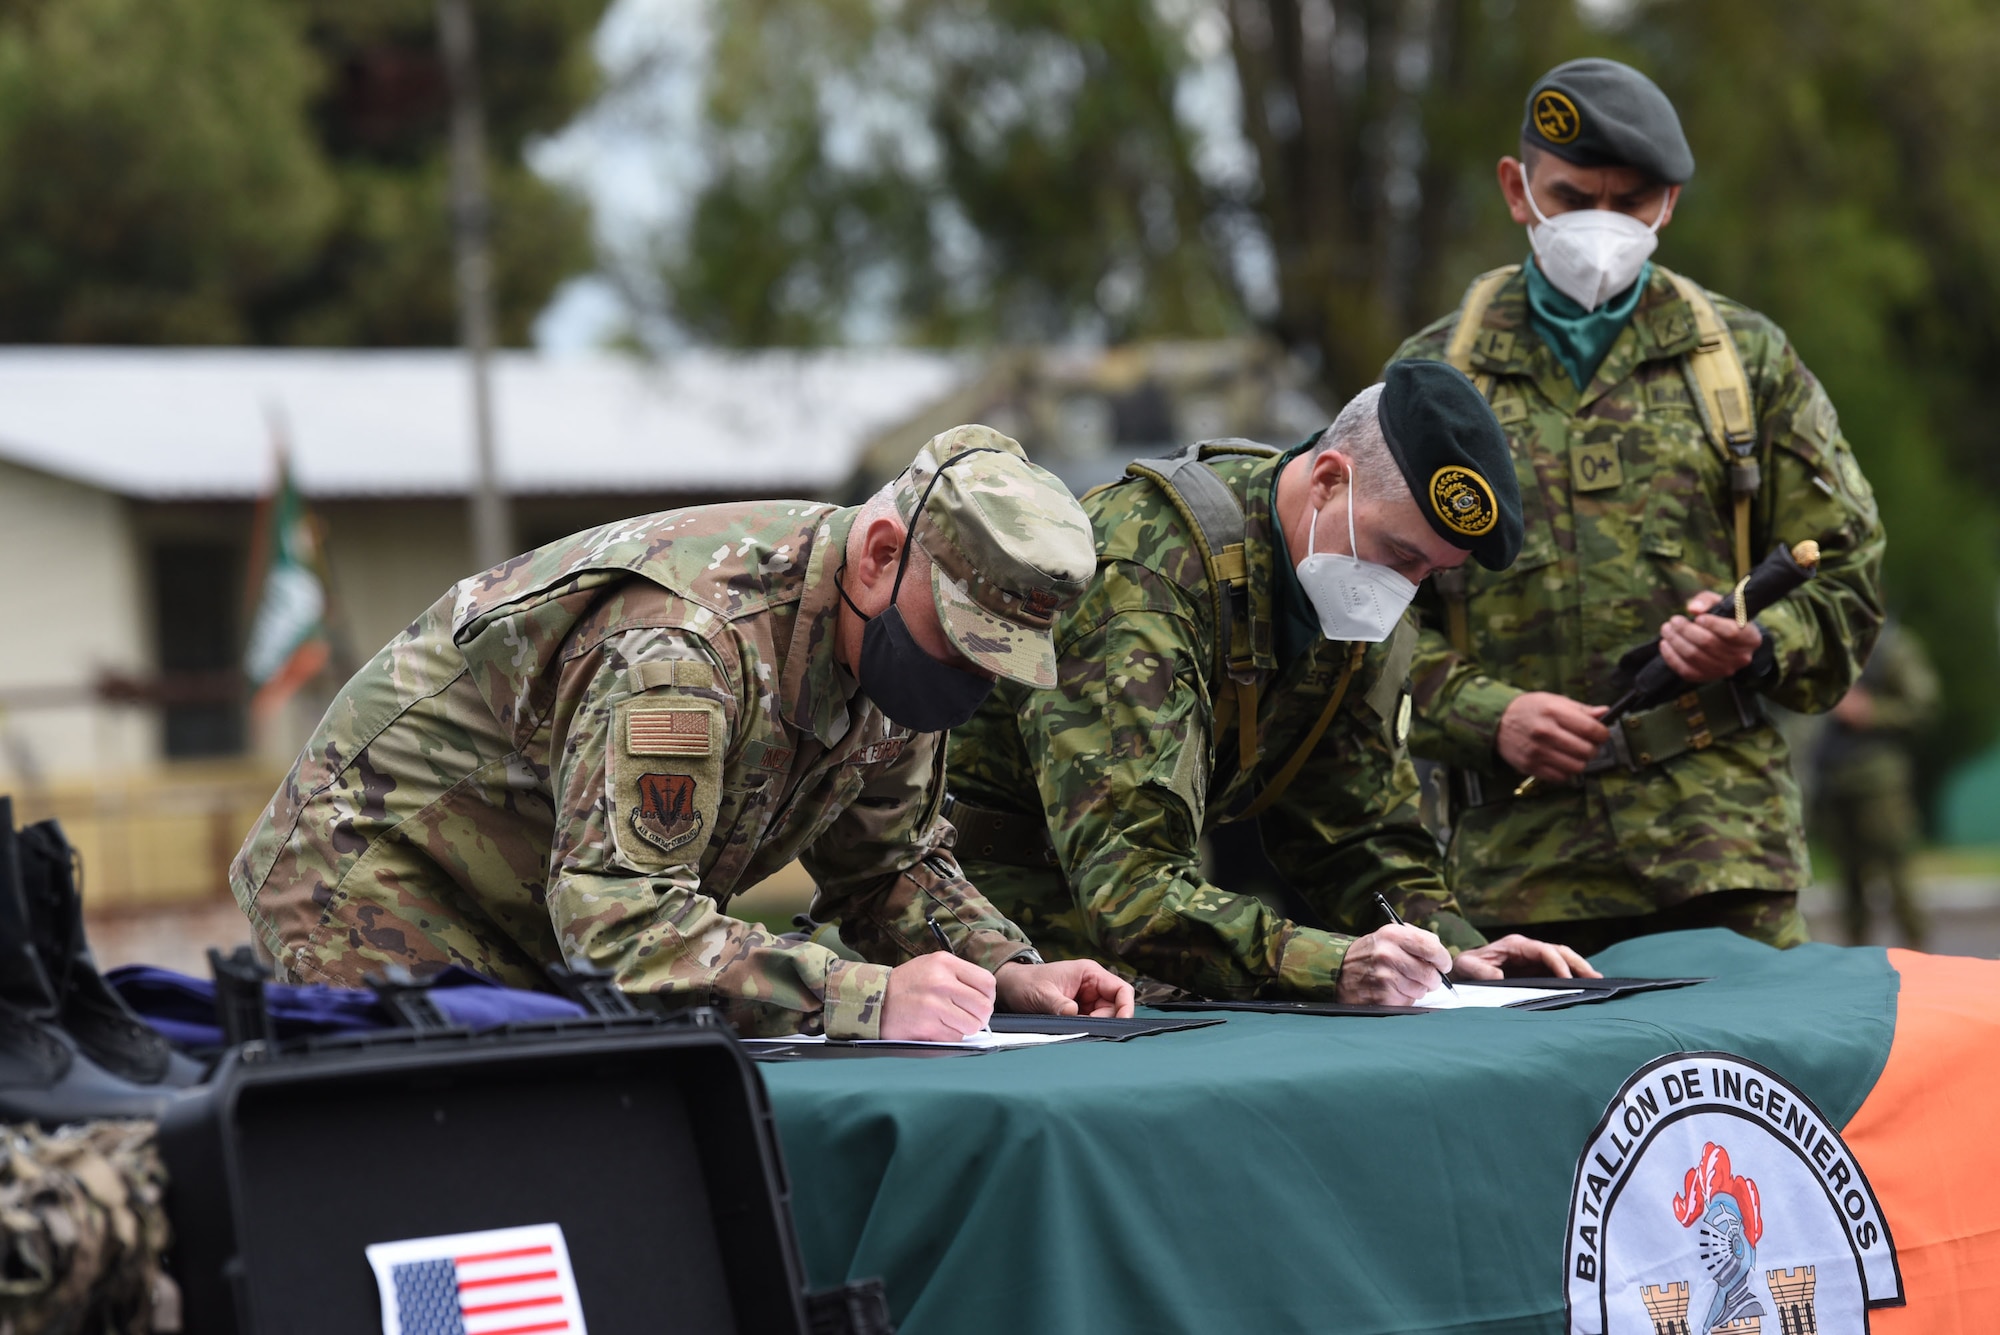 Col. Jaime Gómez (left), U.S. Senior Defense Official, and Brig. Gen. Edwin Adatty (right), Commander, Ecuadorian Army Corps of Engineers, sign equipment transfer documents at a ceremony held on Feb. 25, 2022, in Sangolquí, Ecuador. The equipment, from U.S. Southern Command, will be used to help clear the last remaining part of the country's southern border so it can be returned to the local population for farming and other activities. (U.S. Air National Guard photo by Lt. Col. Allison Stephens)